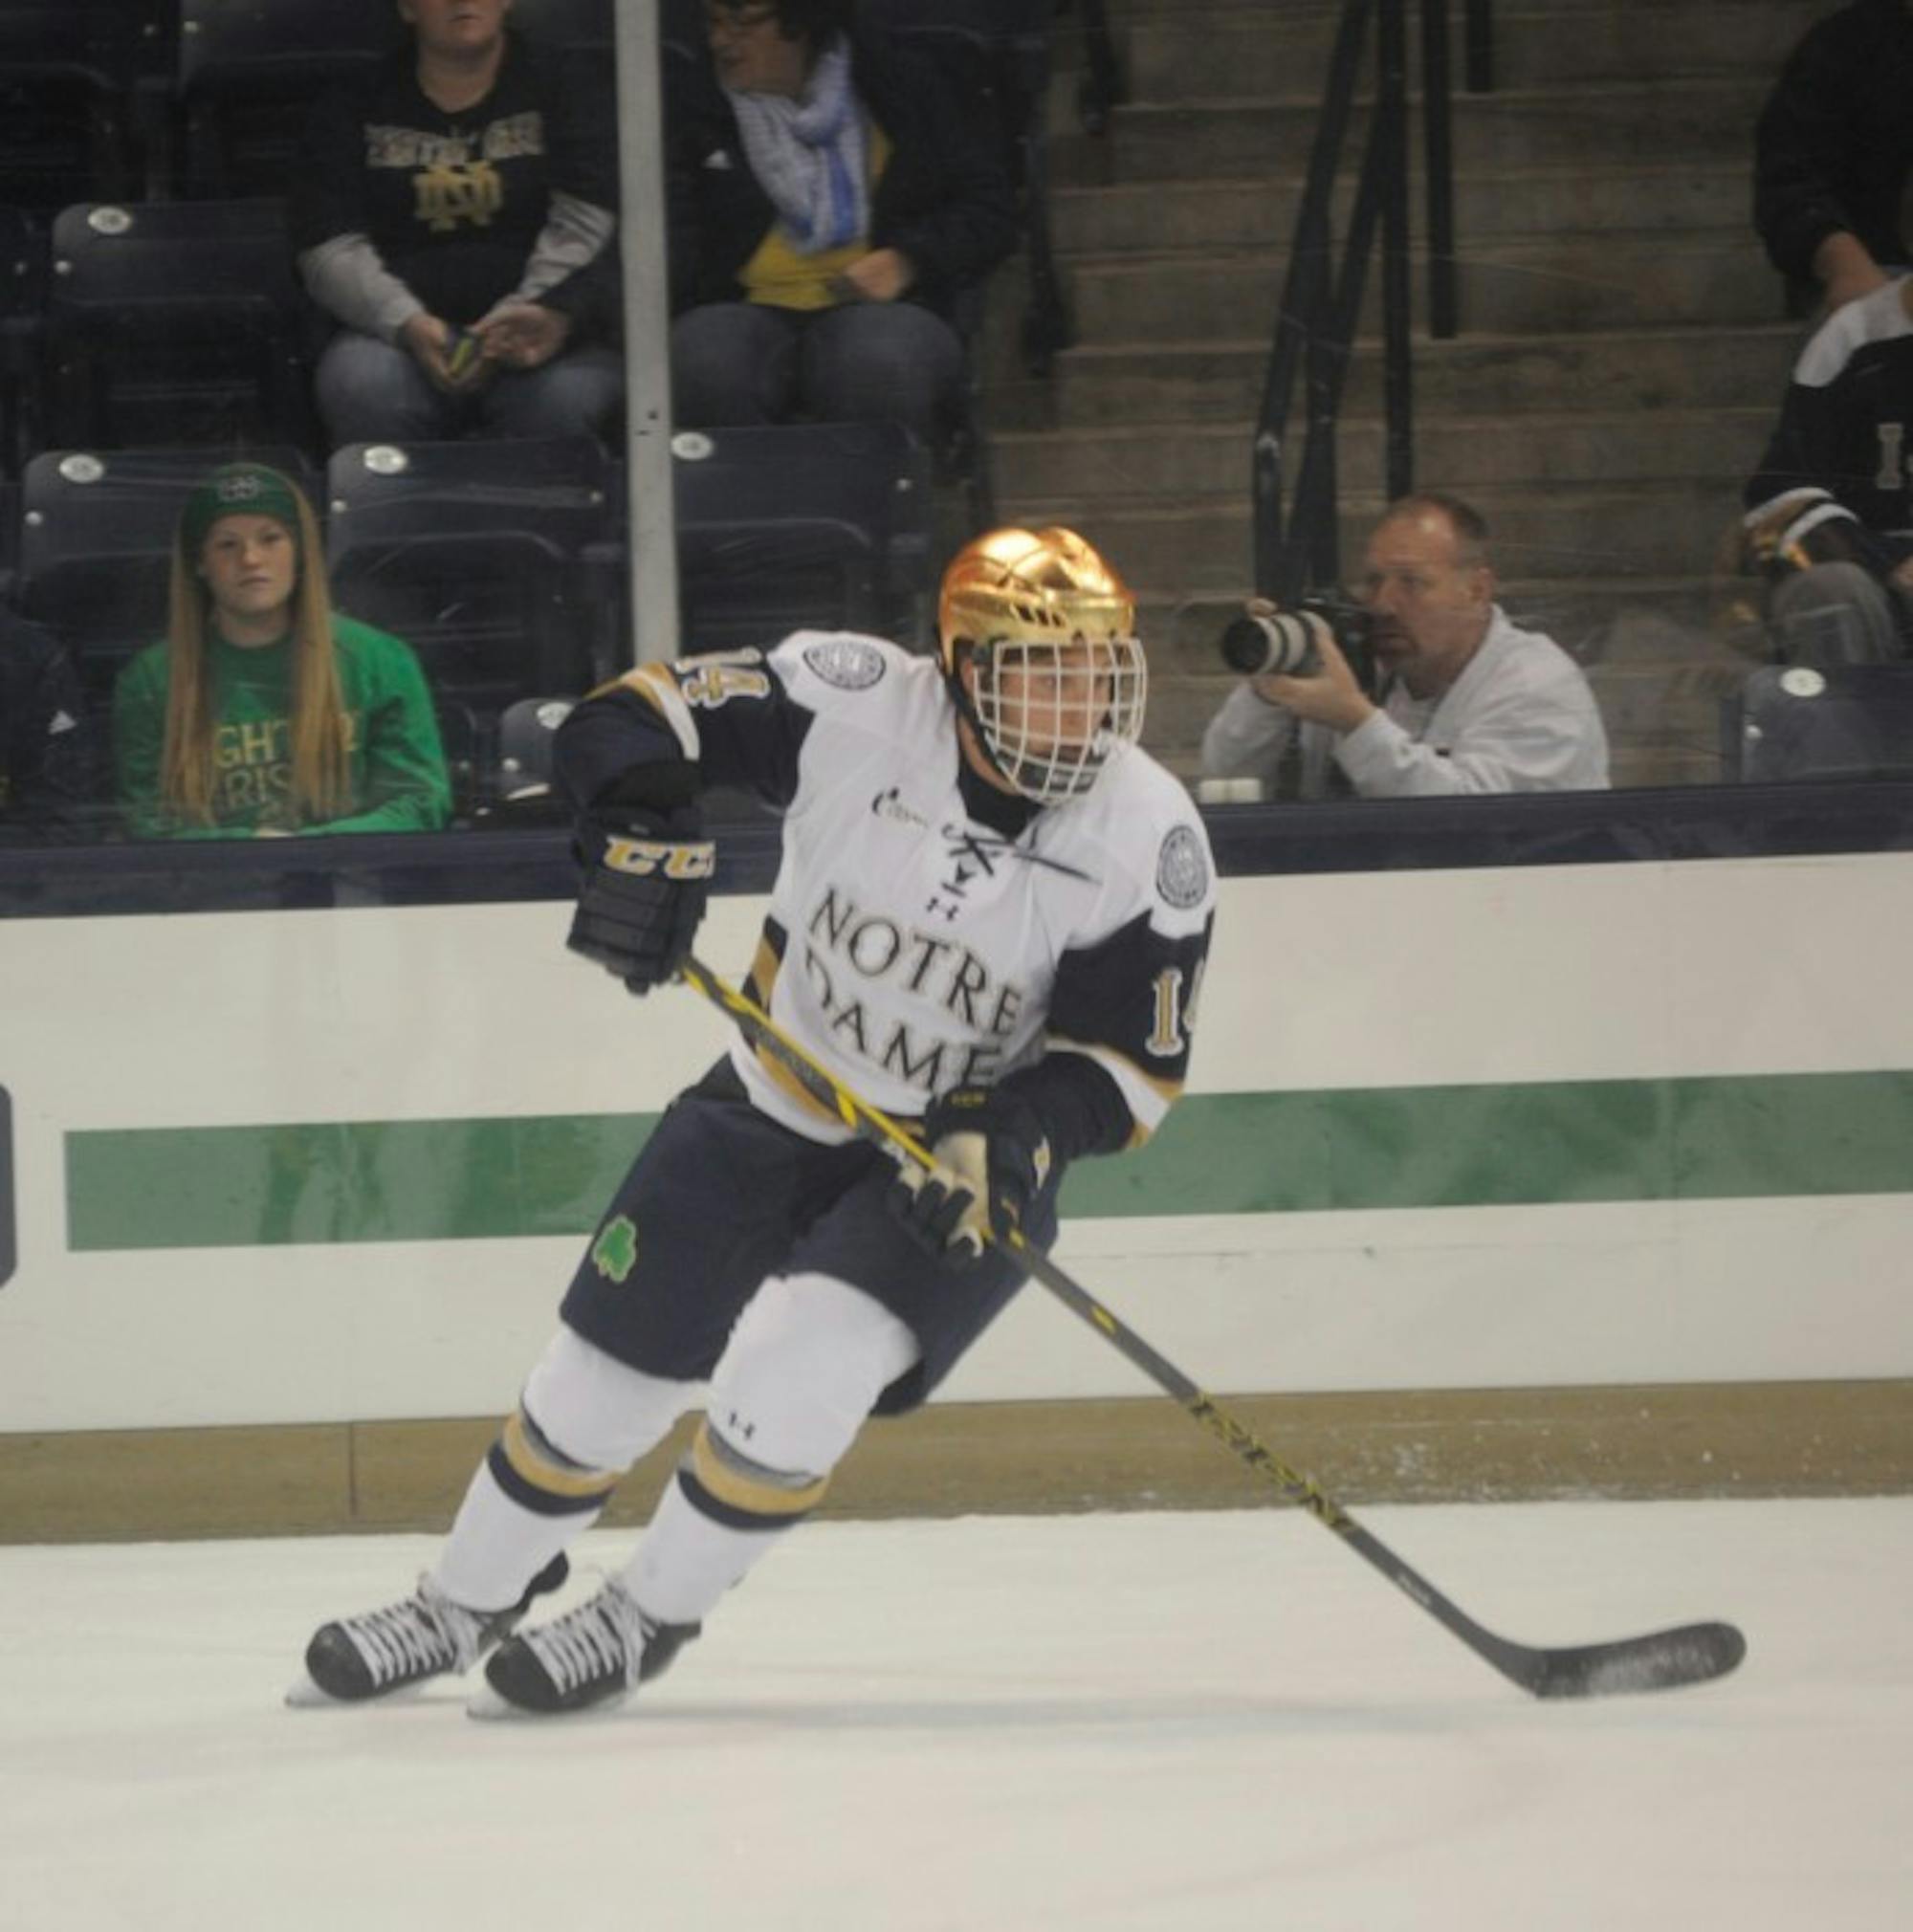 Irish junior center Thomas DiPauli turns toward the puck in Notre Dame’s loss Sunday. DiPauli tallied  a first-period goal in the game.